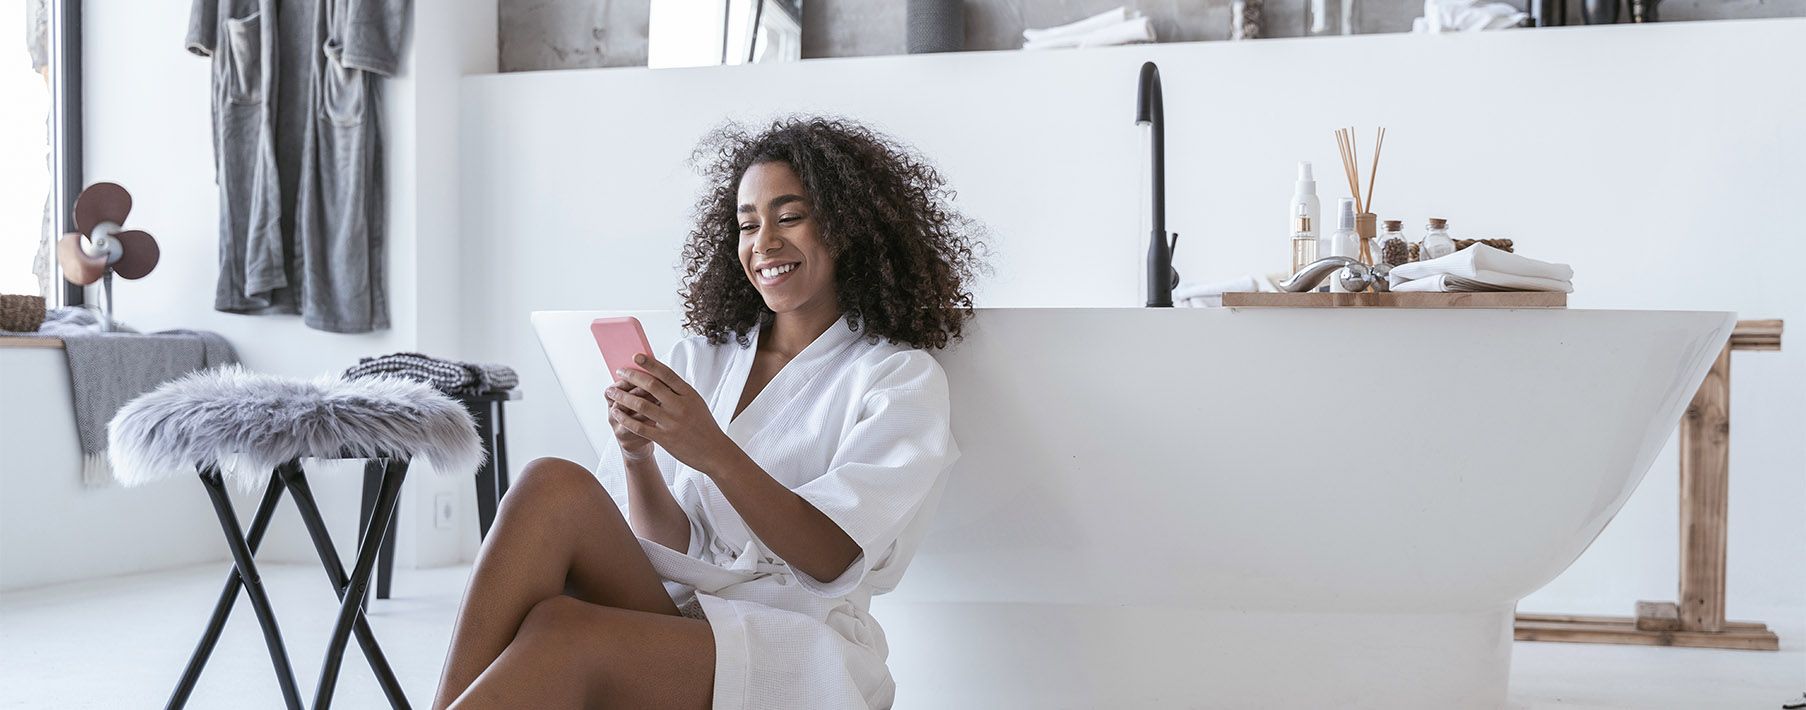 A woman sitting on the floor of her bathroom in a robe leaning on her tub while looking at her phone